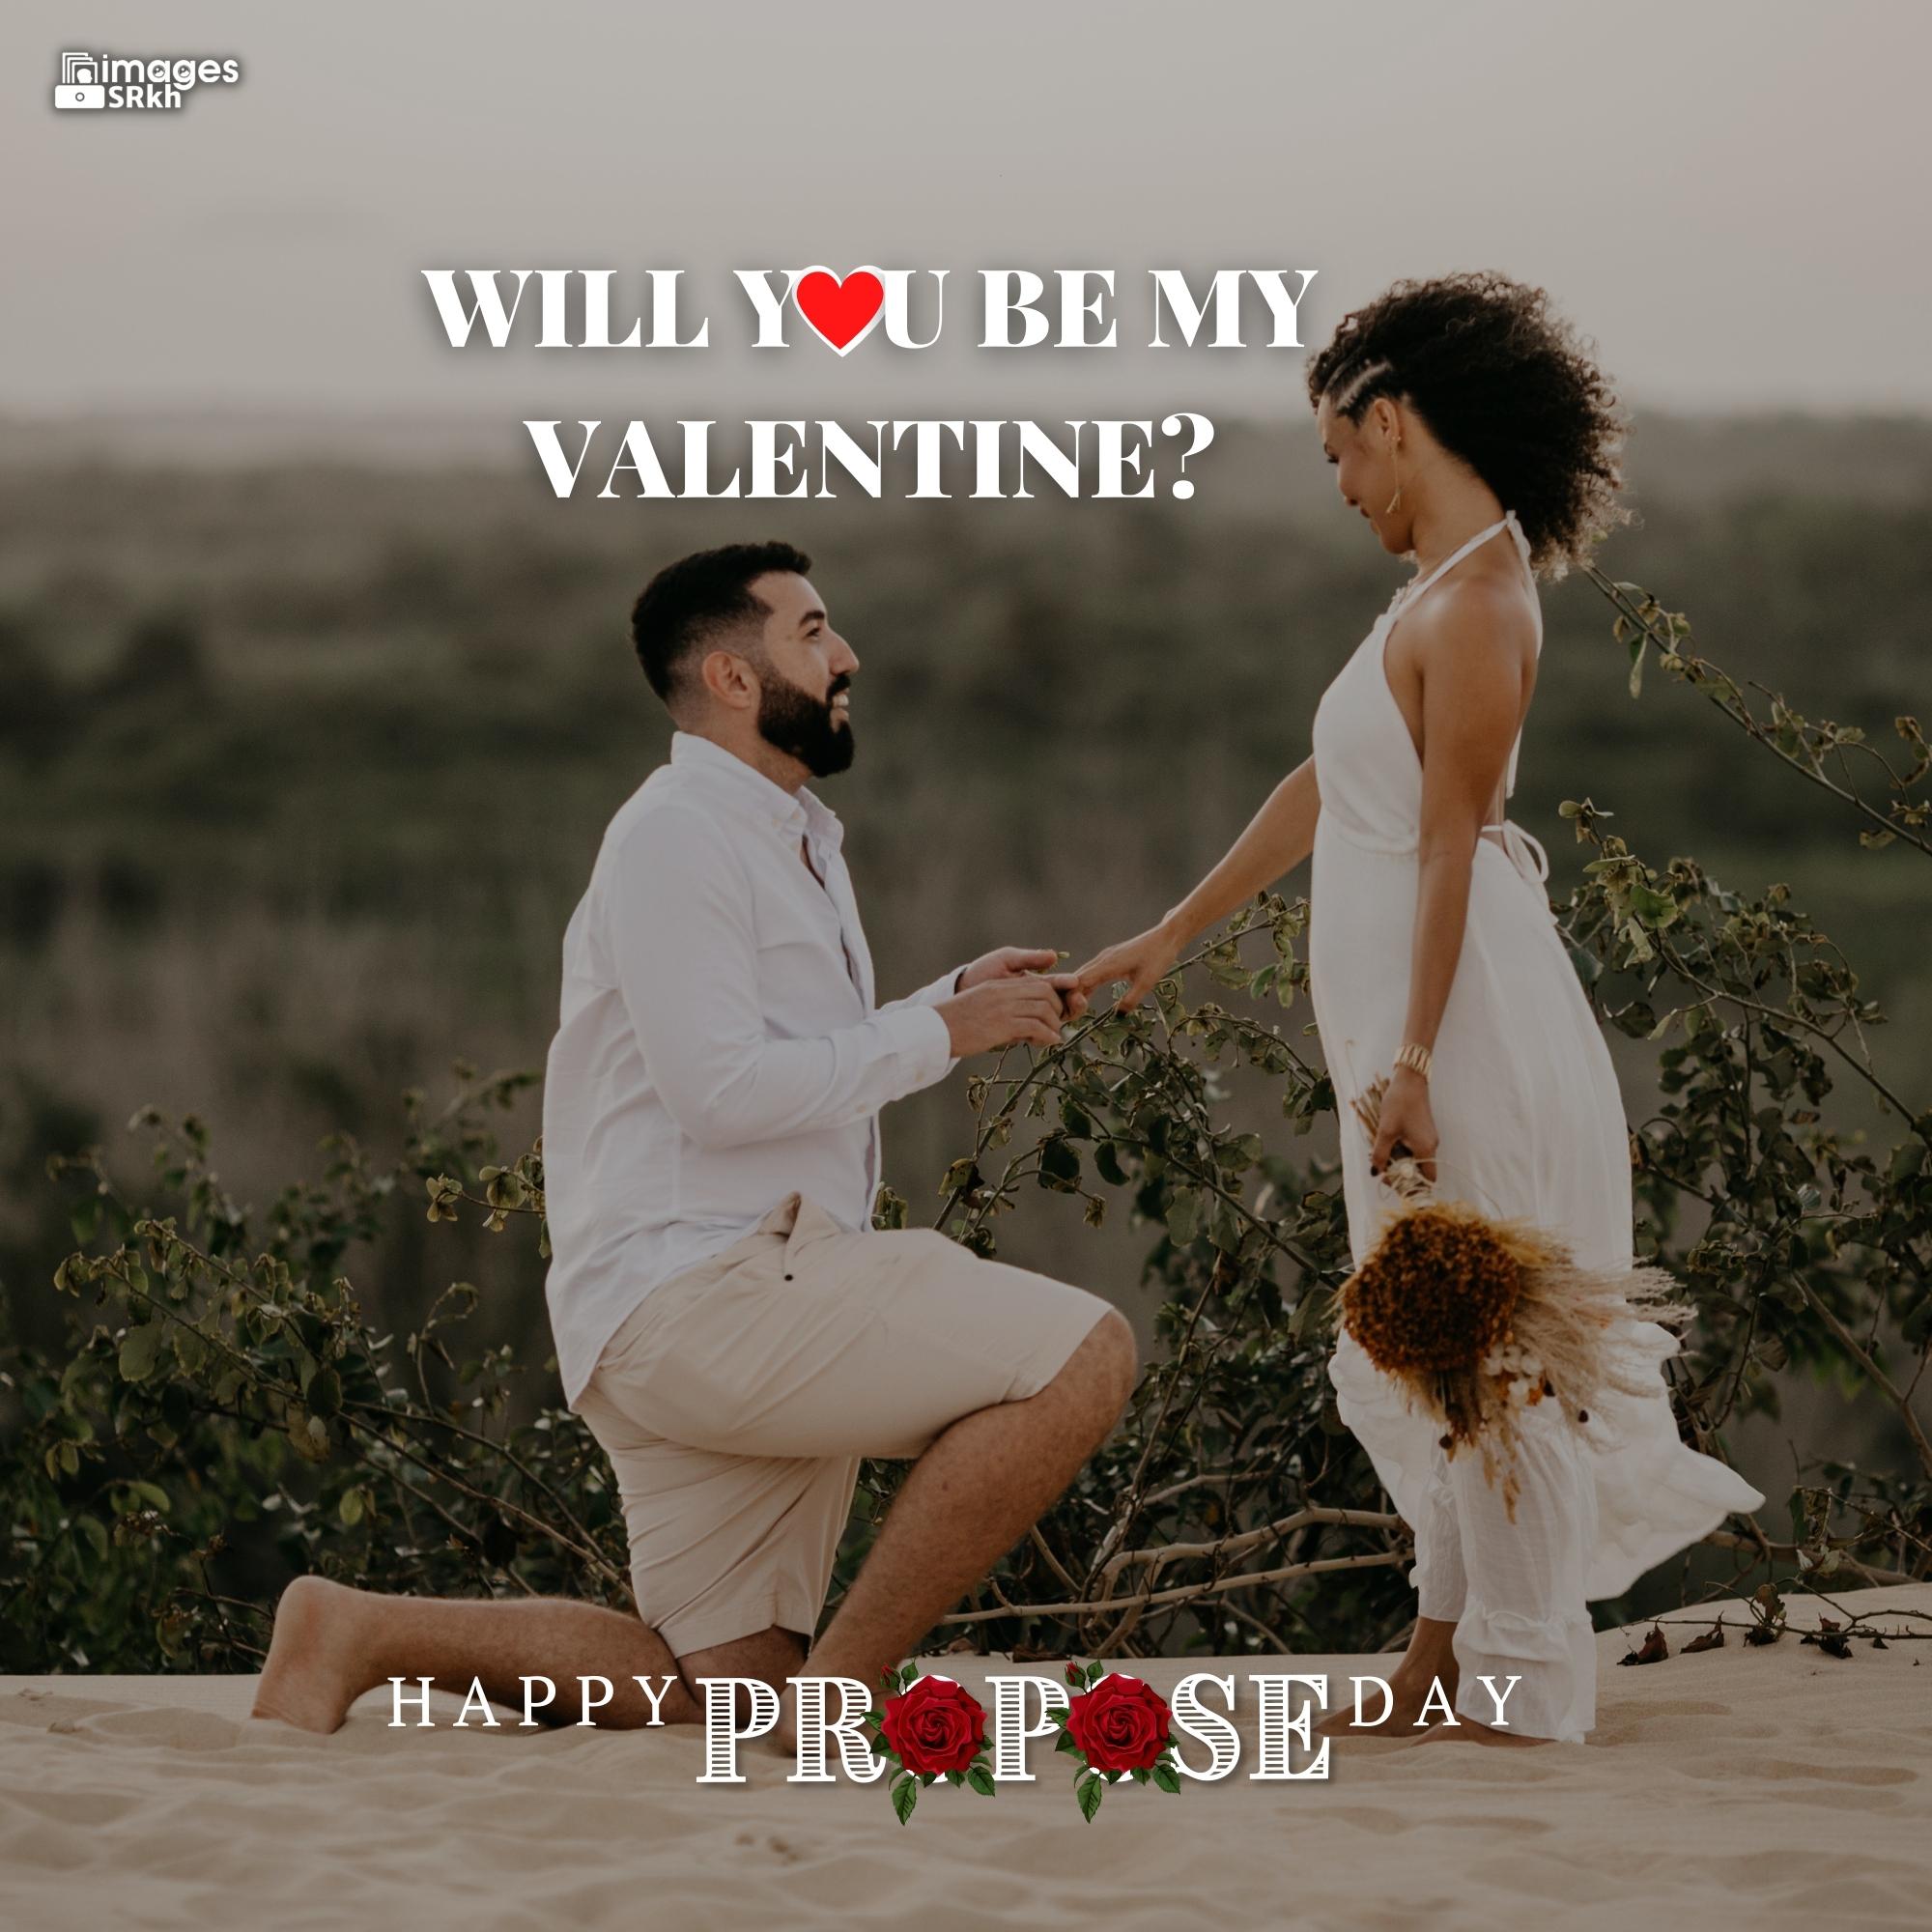 Propose Day Images | 227 | Will You Be My Valentine